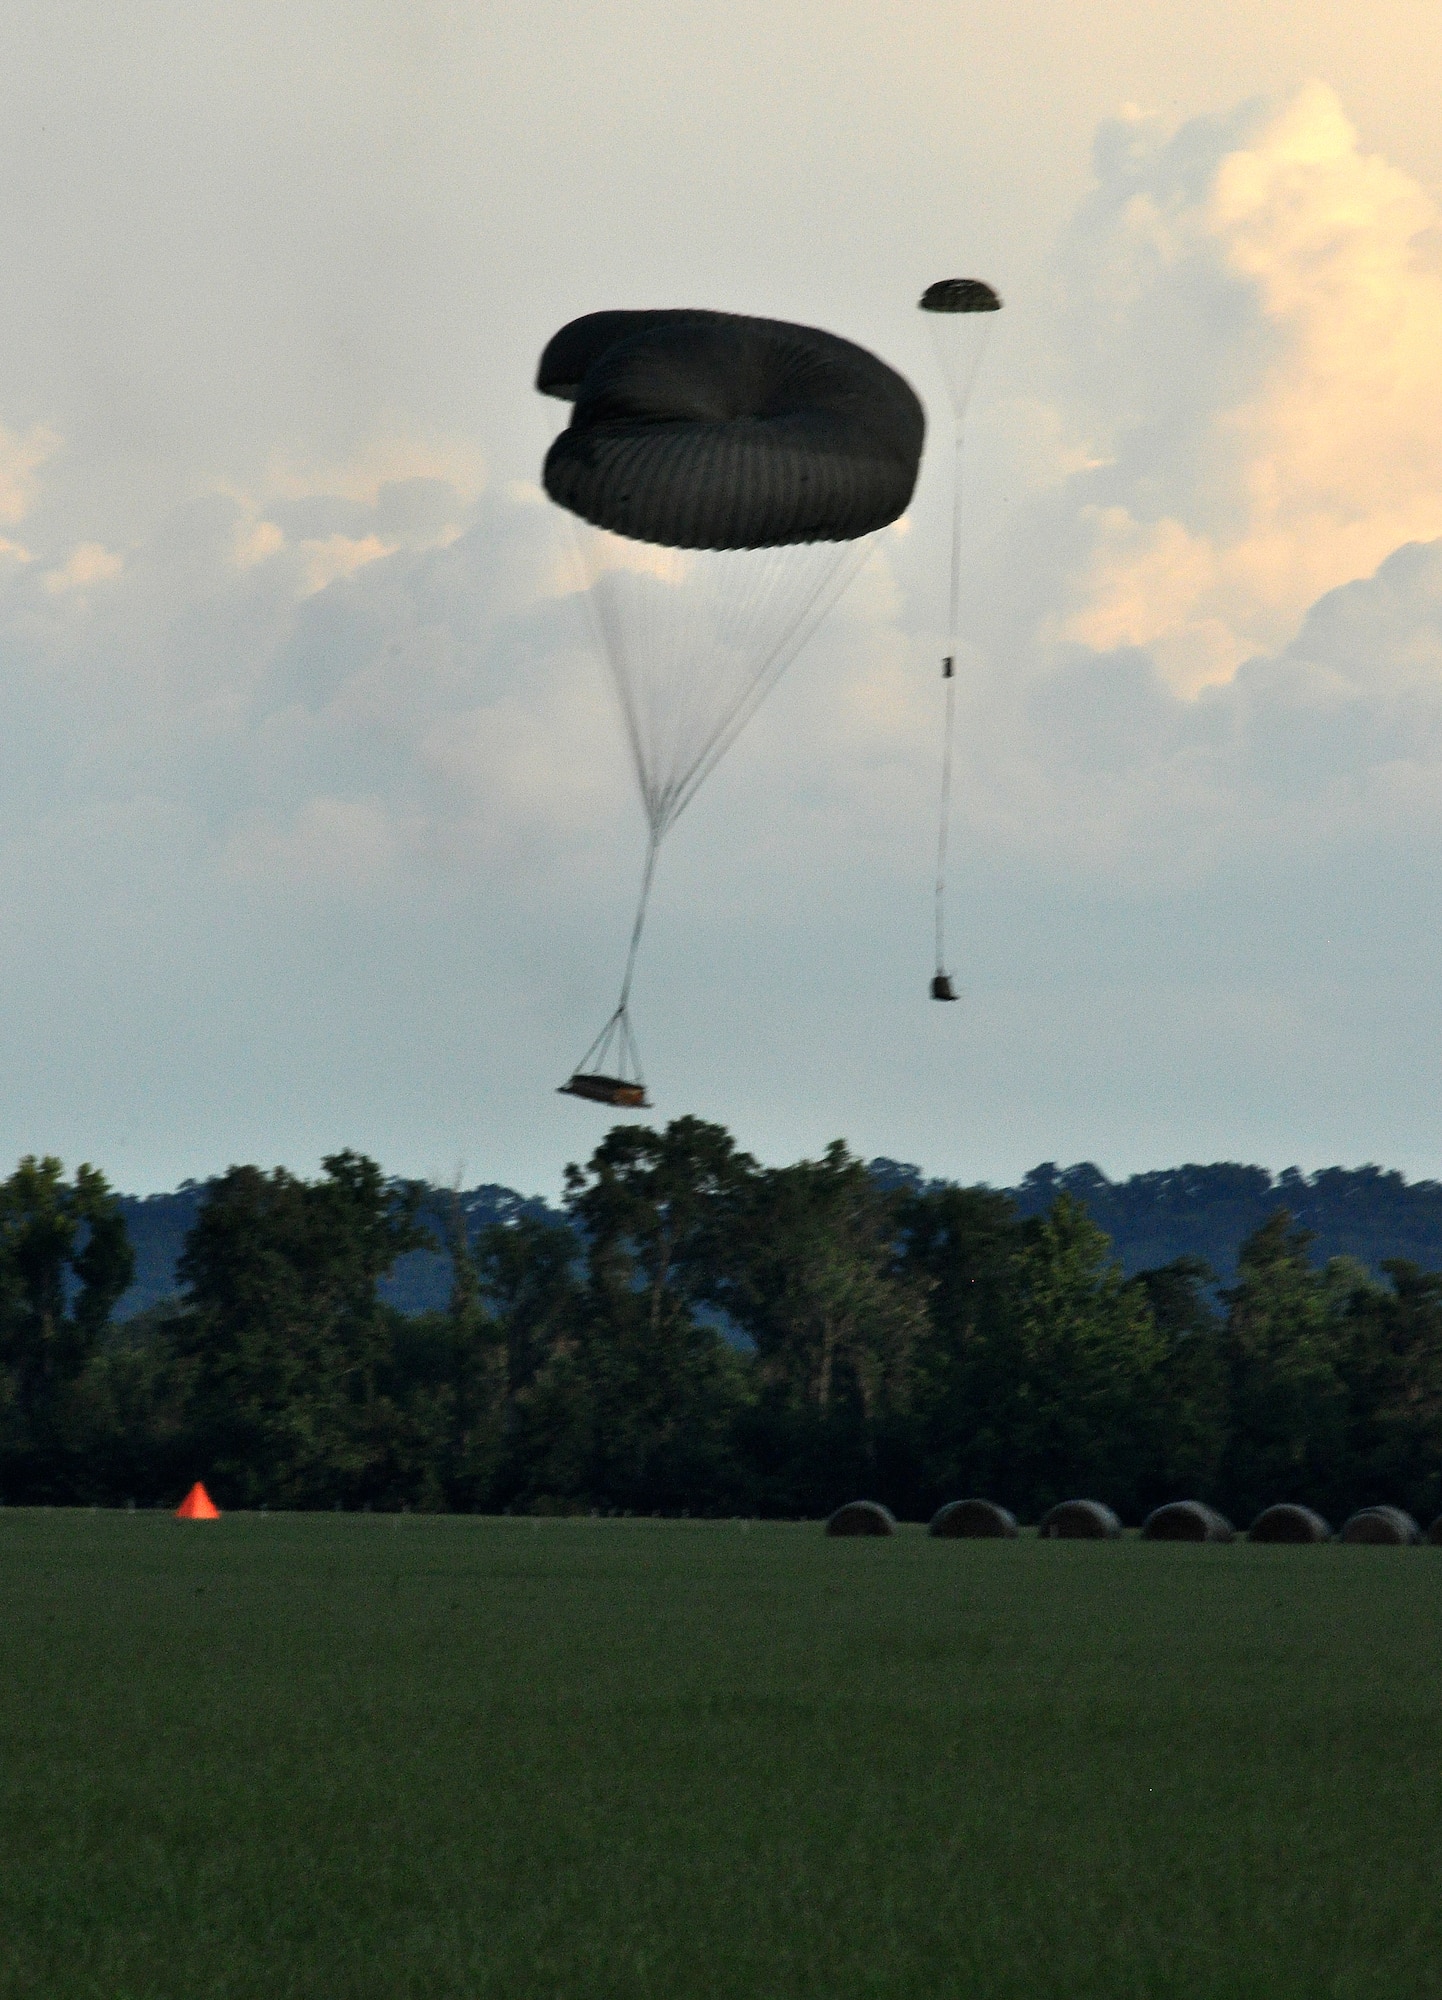 A 3,700-pound training platform suspended from two 64-inch diameter parachutes are shown prior to landing a few yards from the target.